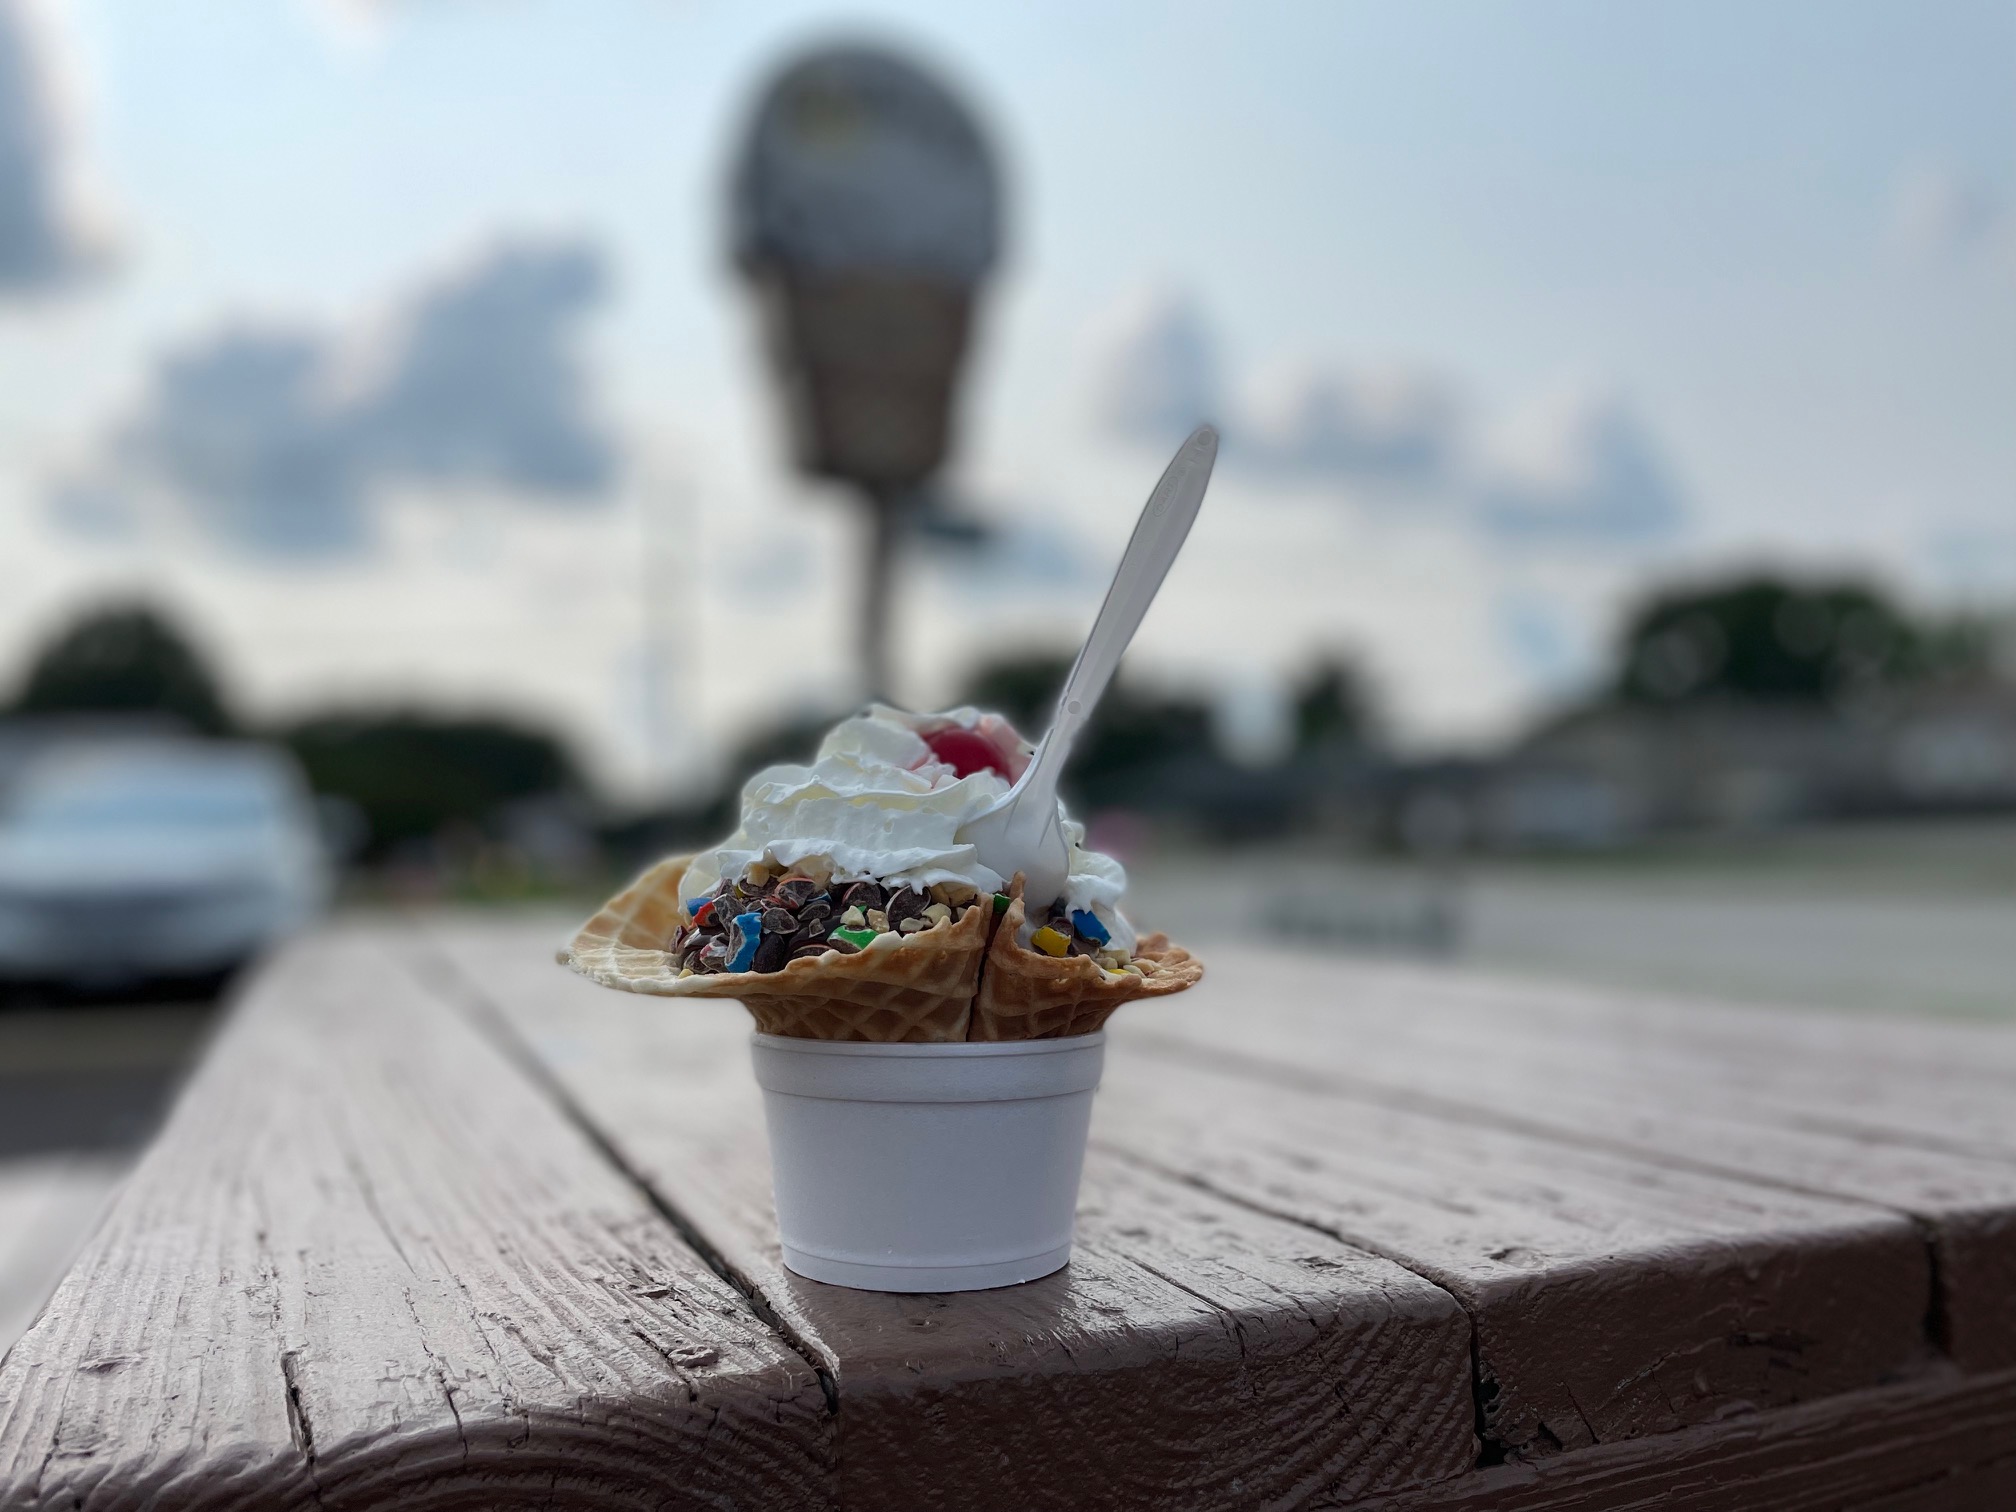 On a brown picnic table outside Jarlings, there is a white styrofoam cup with a waffle cone inside with ice cream, hot fudge, whipped cream, and a cherry on top with a white plastic spoon in it. Photo by Alyssa Buckley.